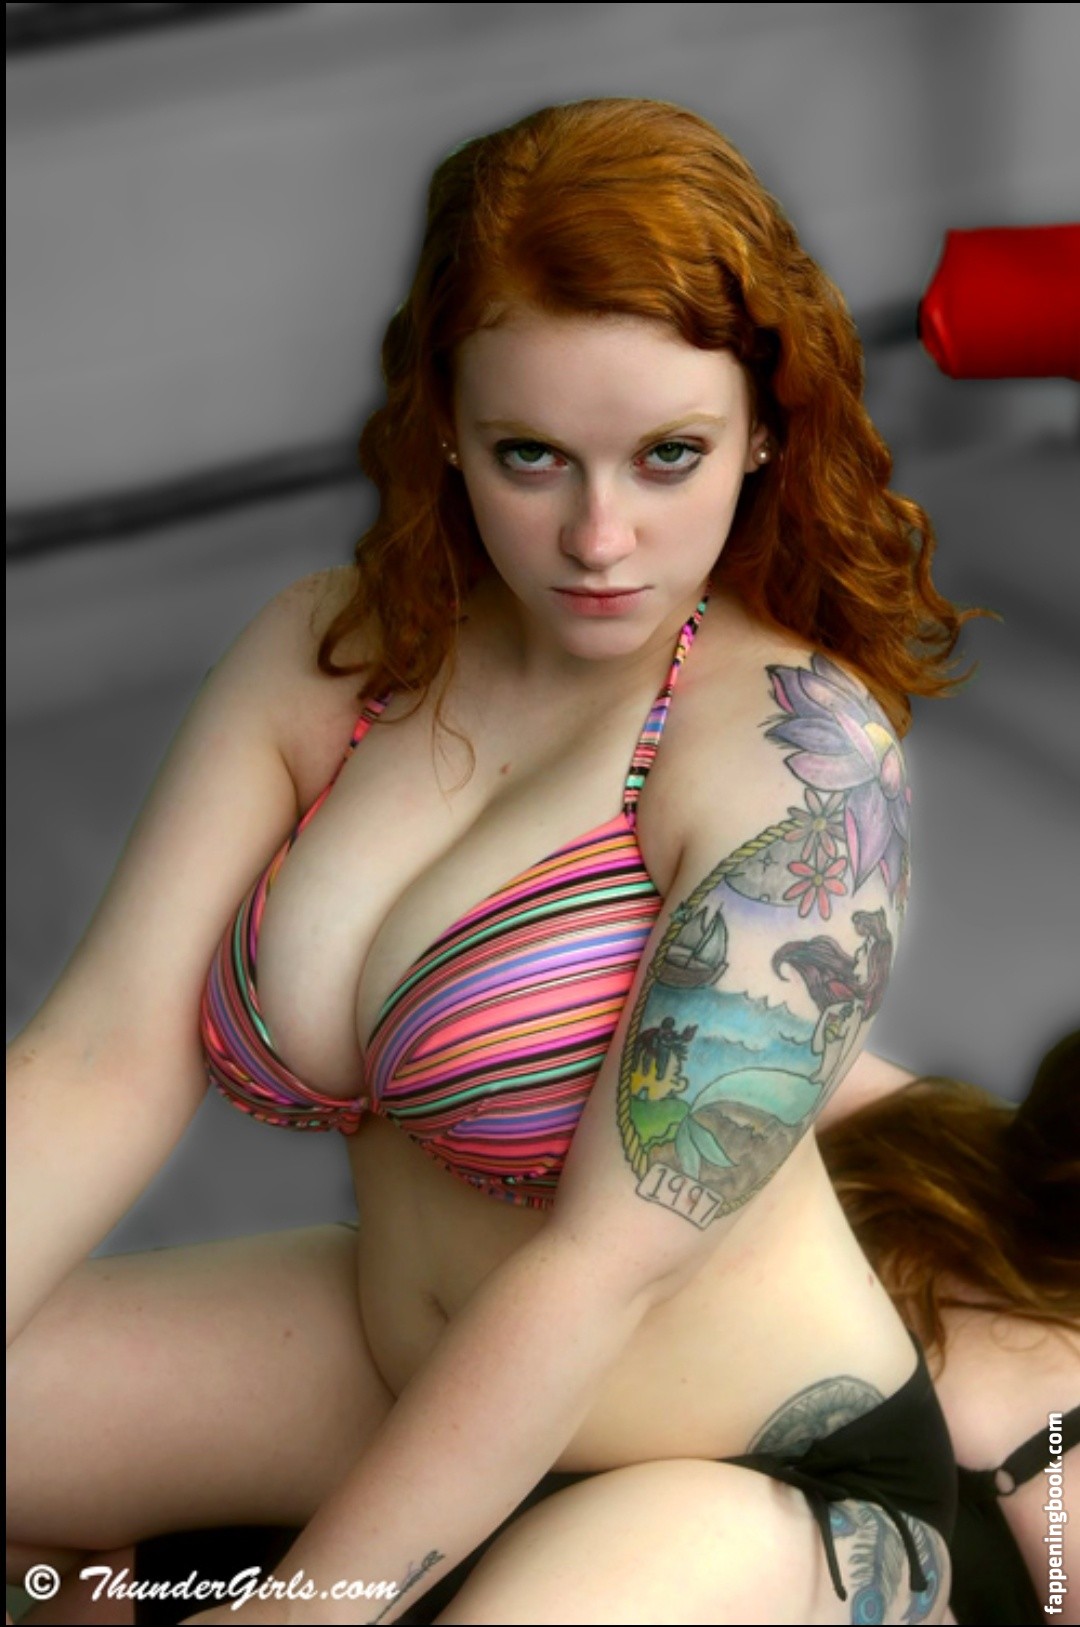 Chubby redhead onlyfans